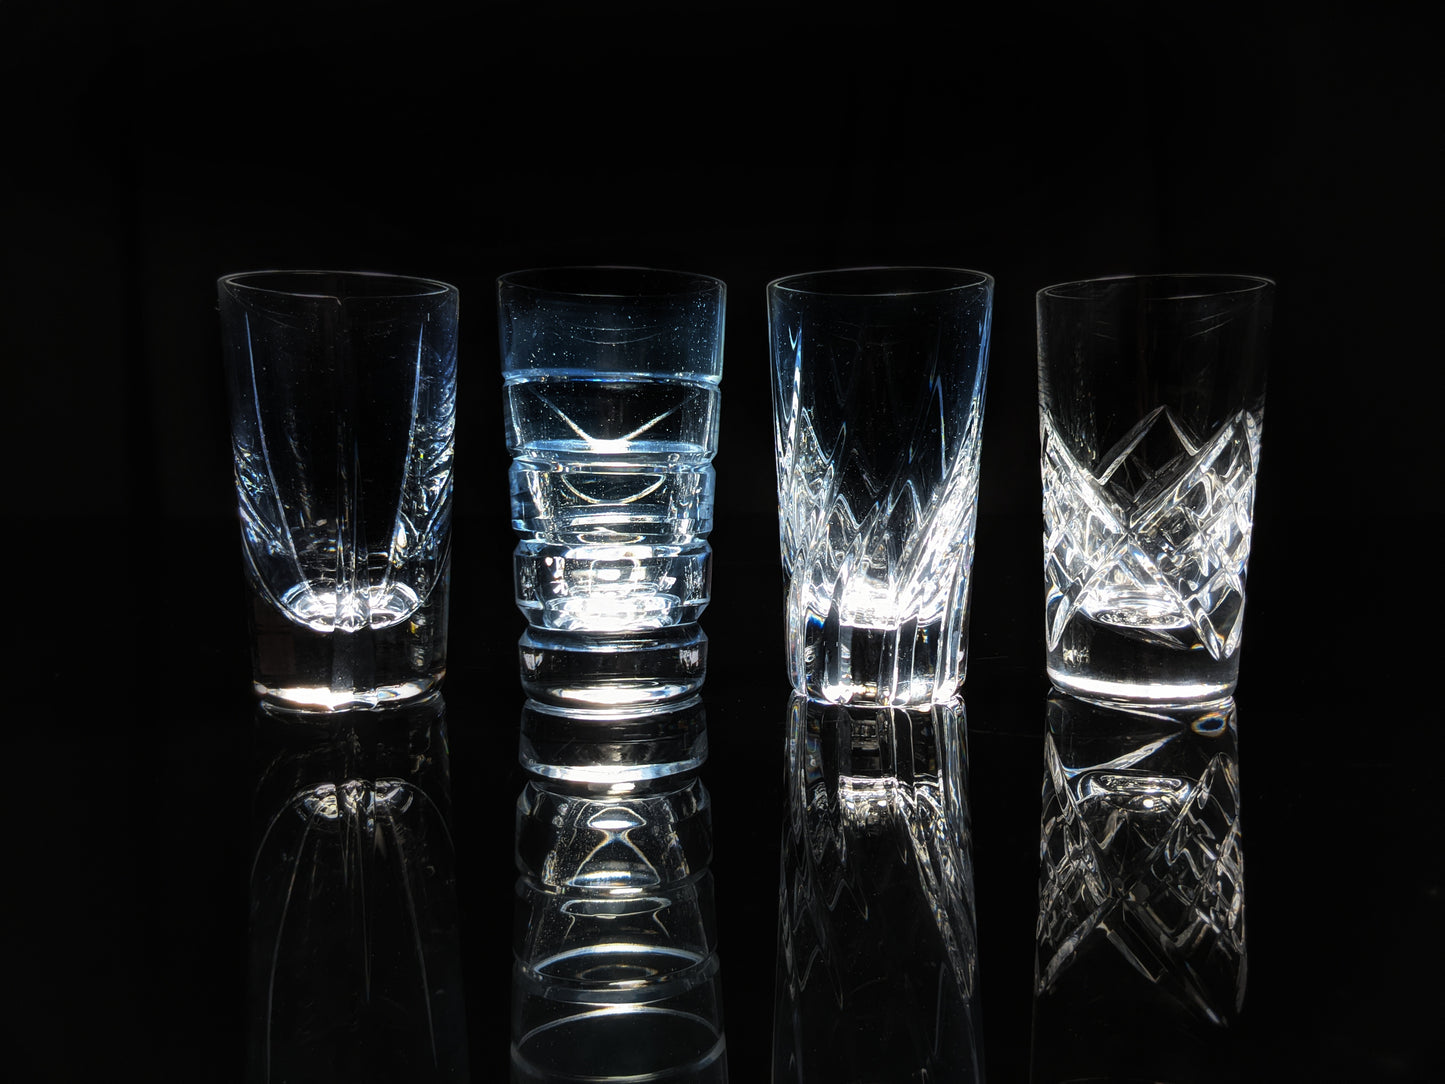 Faberge Imperial Clear Crystal Shot Glasses Set of 4